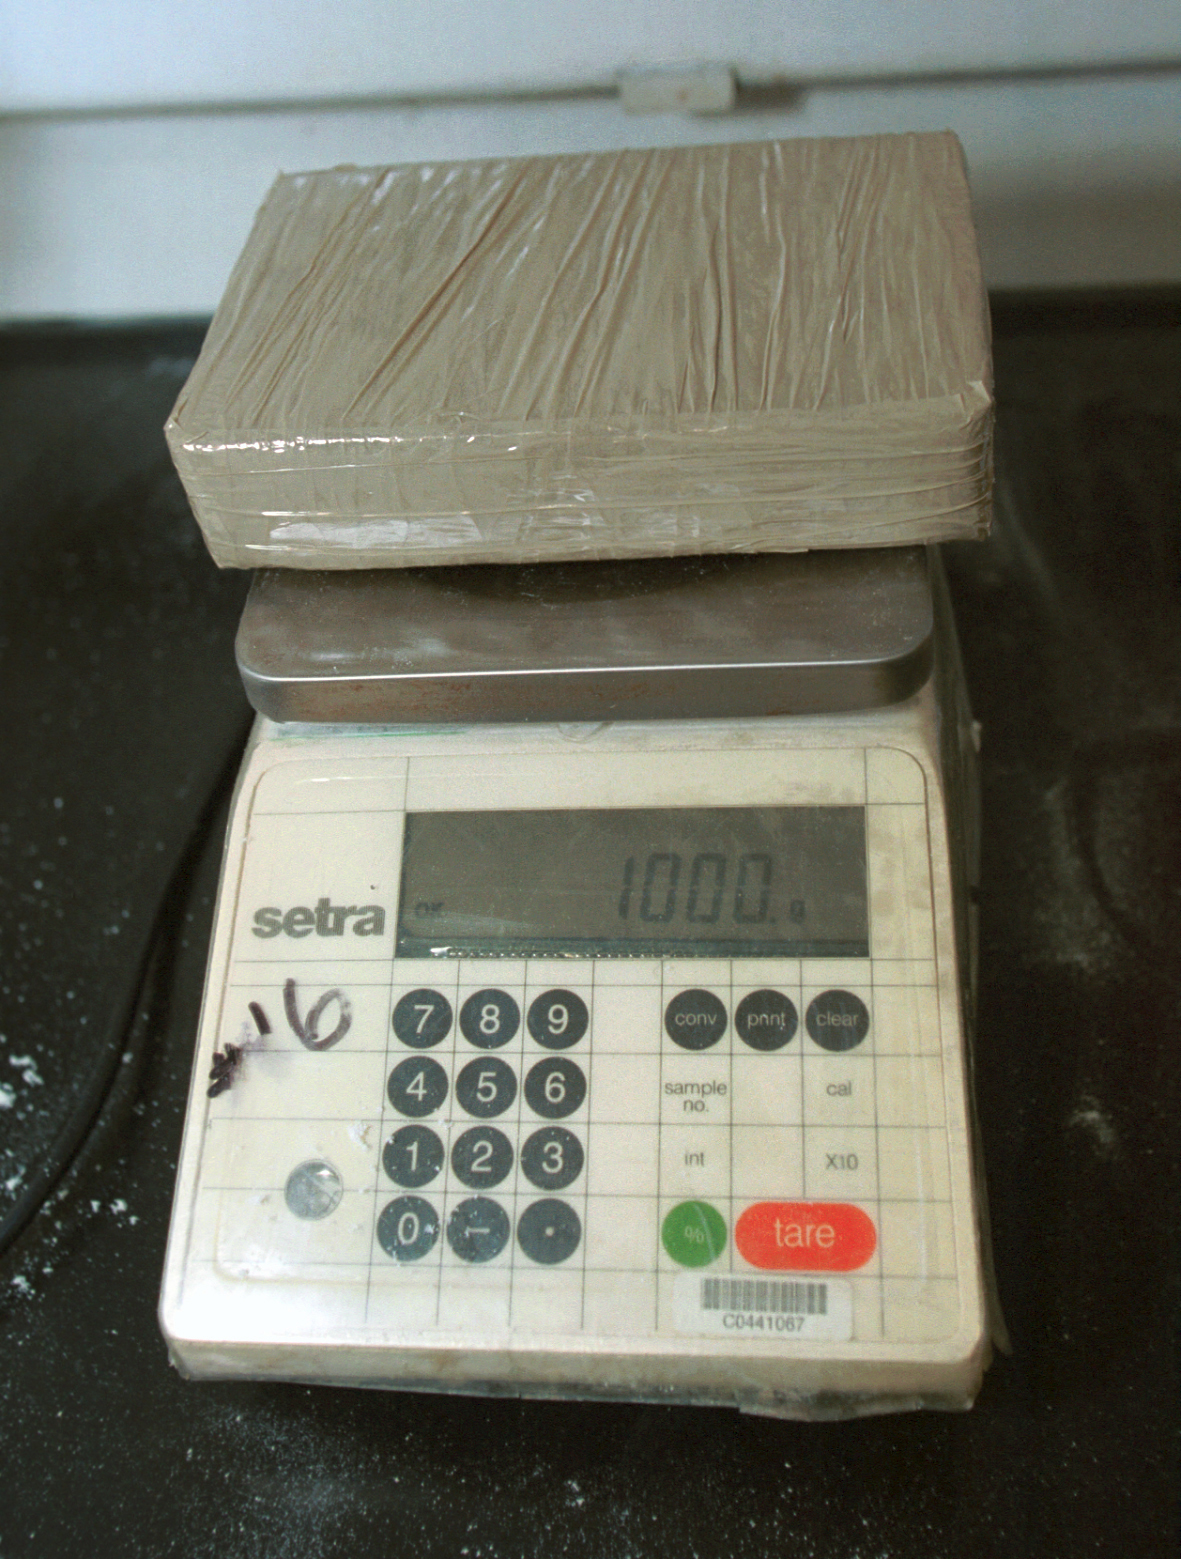 An exact kilo of drugs is weighed for processing.